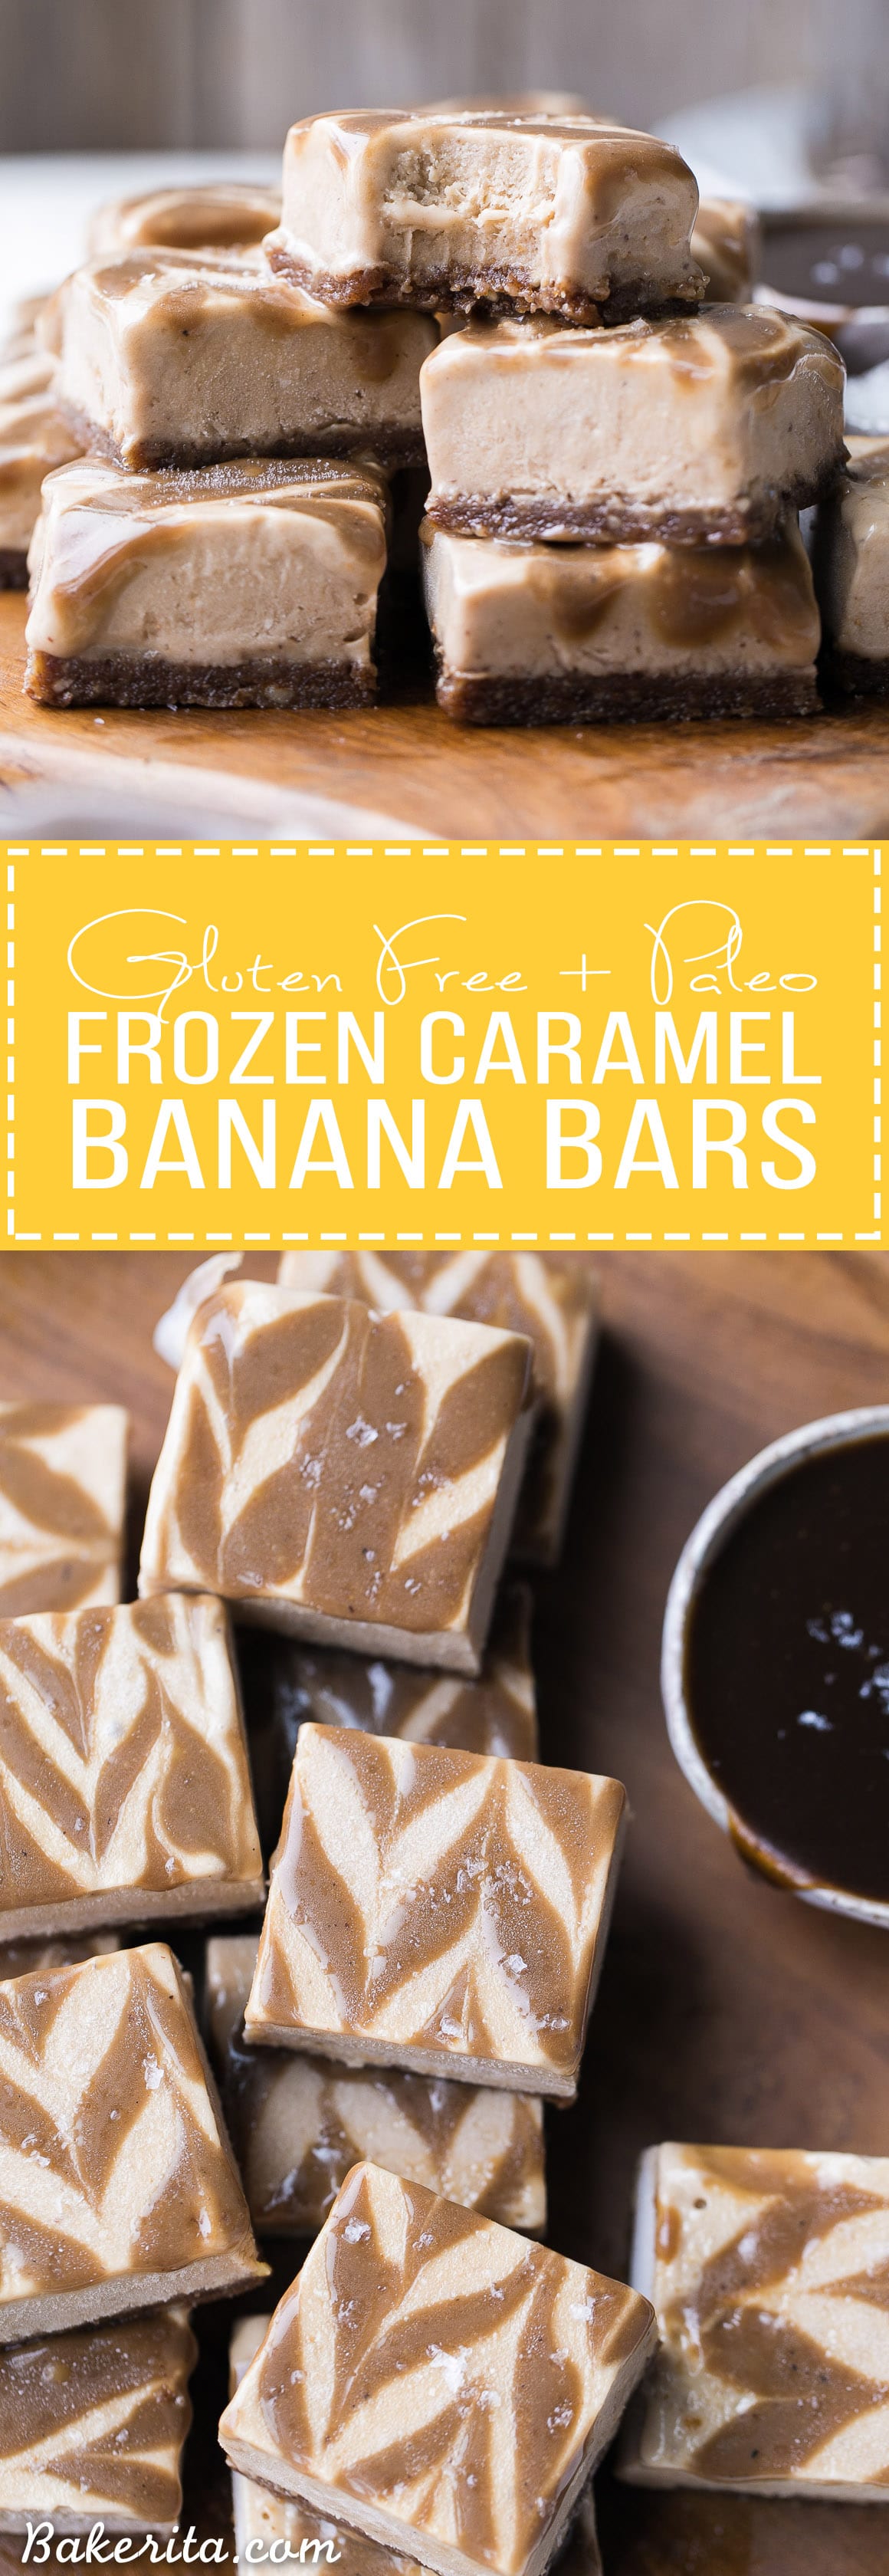 These Frozen Caramel Banana Bars are easy to make in a blender or food processor, and they're super creamy and refreshing. These gluten-free and paleo bars have a chewy pecan-date crust, topped with banana nice cream and a caramel swirl.